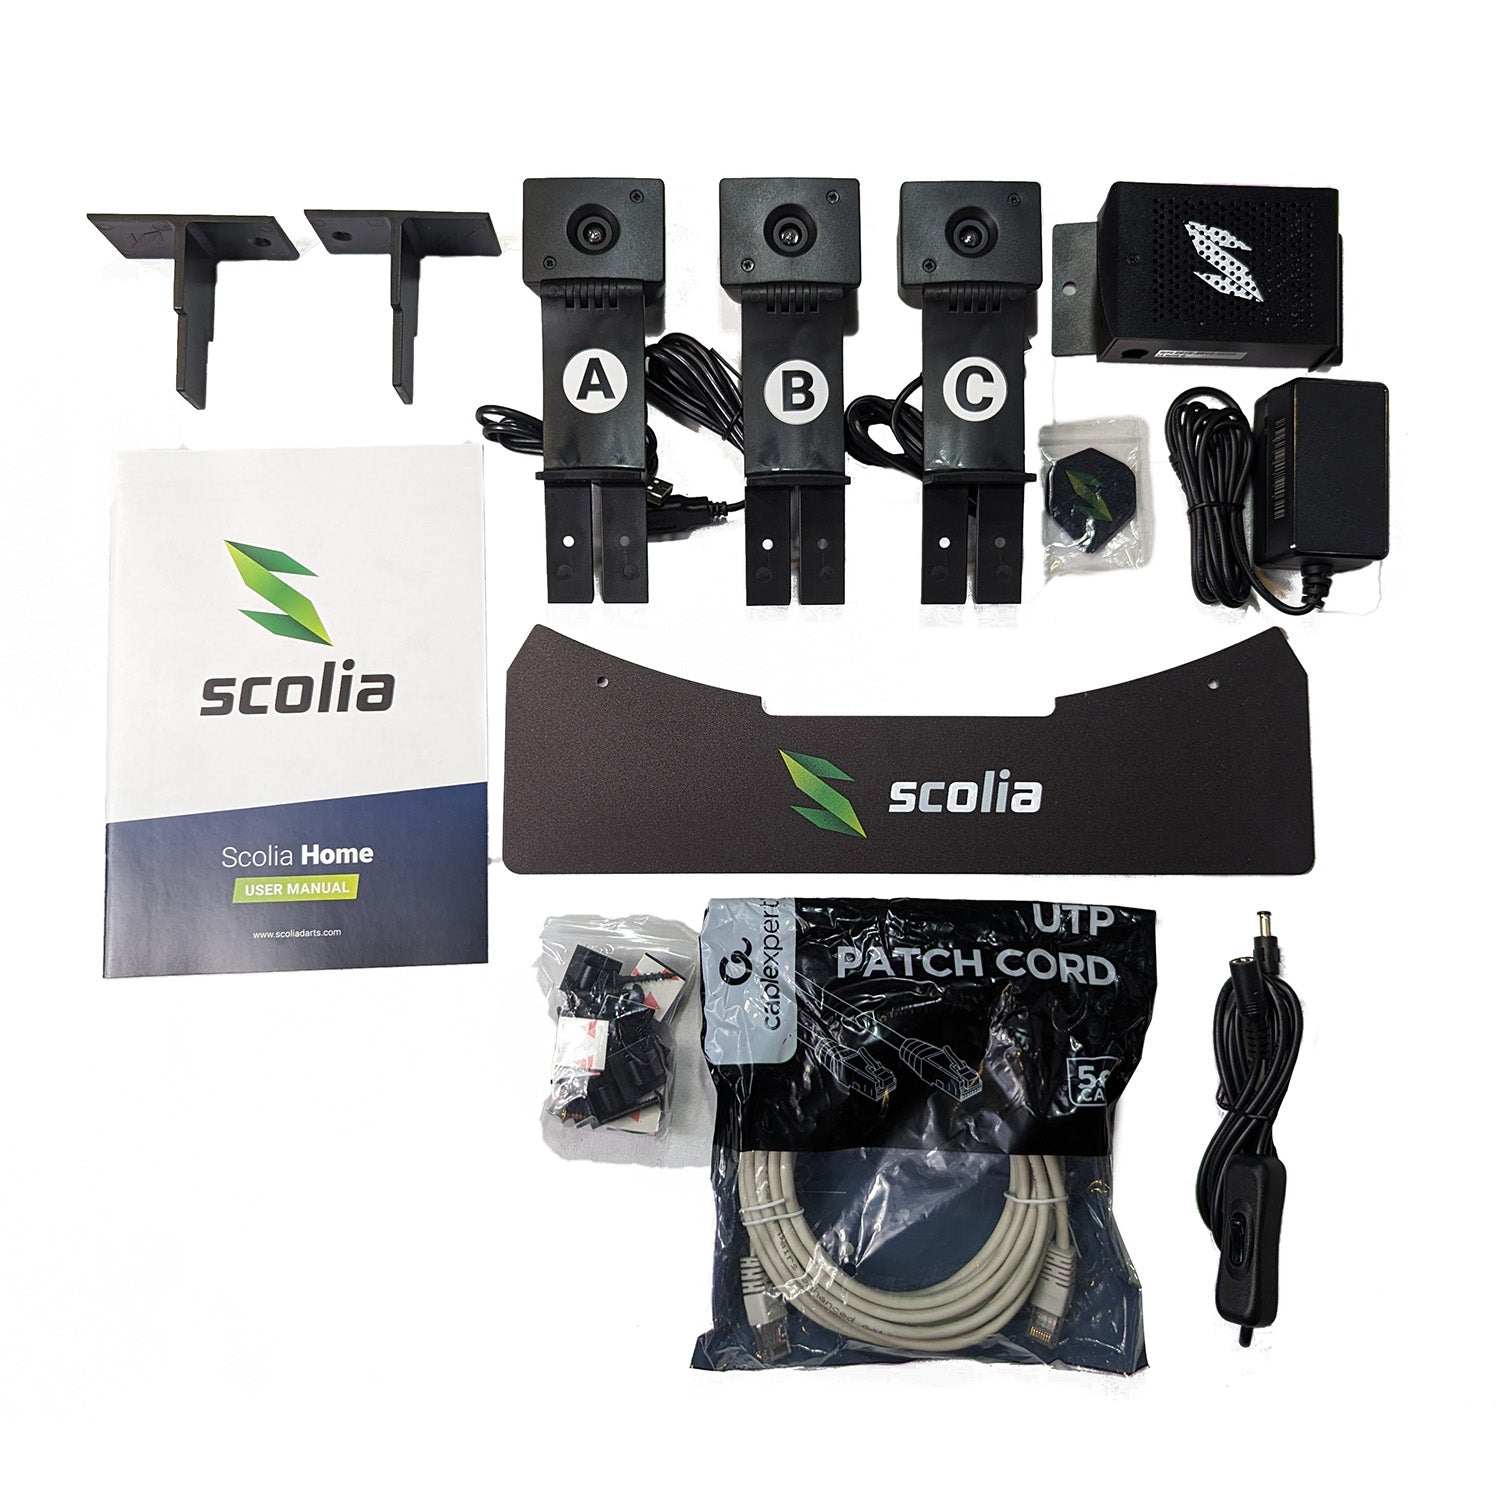 Scolia Home Cameras and Scoring System Only (no Spark Light Ring)